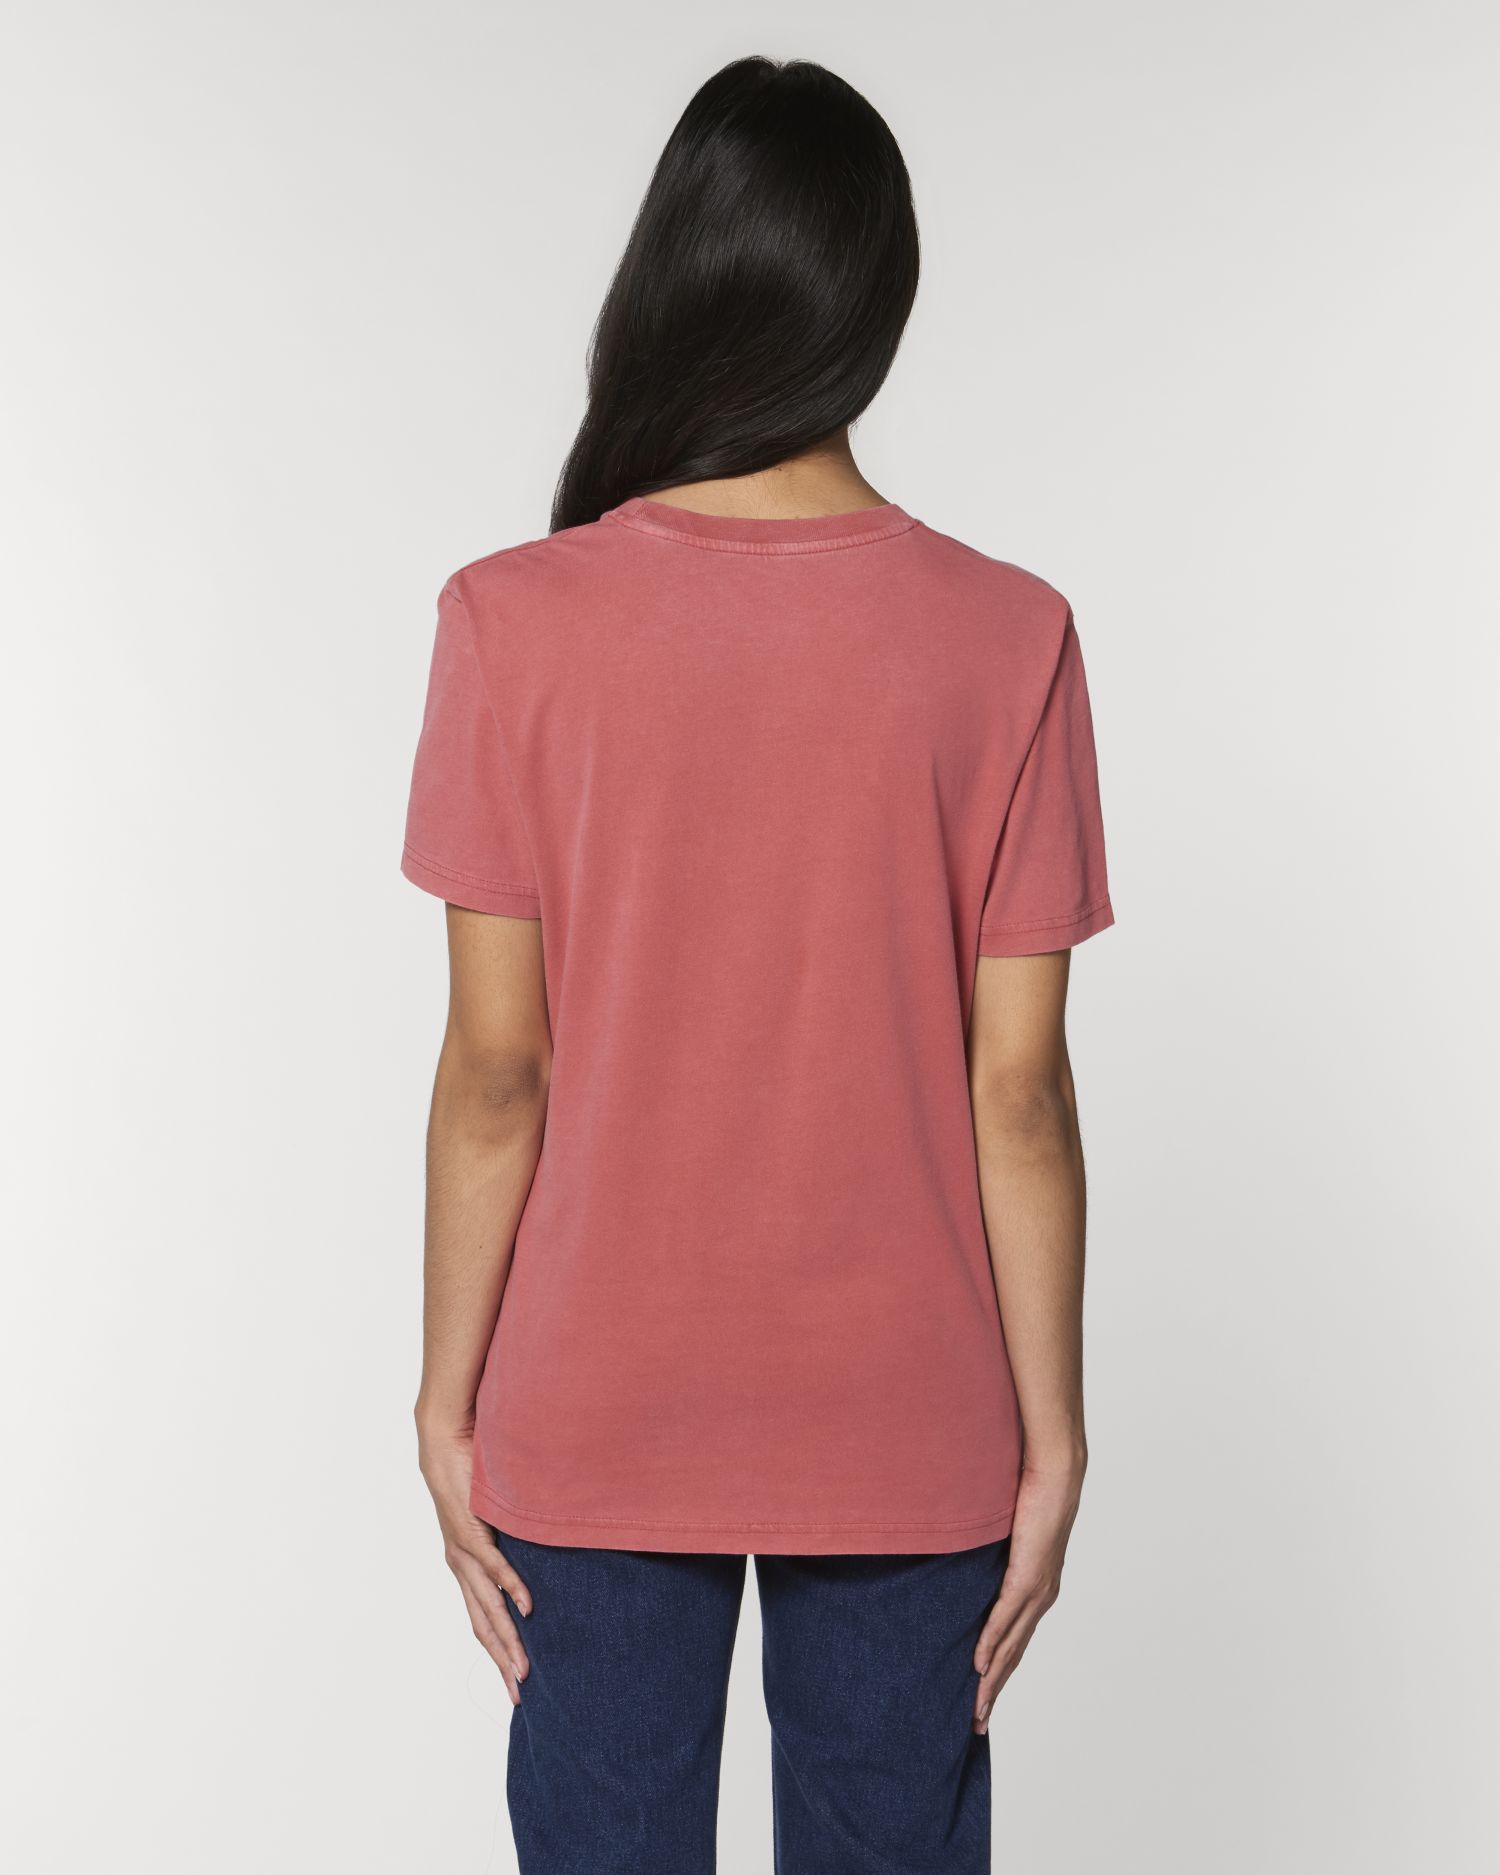 T-Shirt Creator Vintage in Farbe G. Dyed Carmine Red